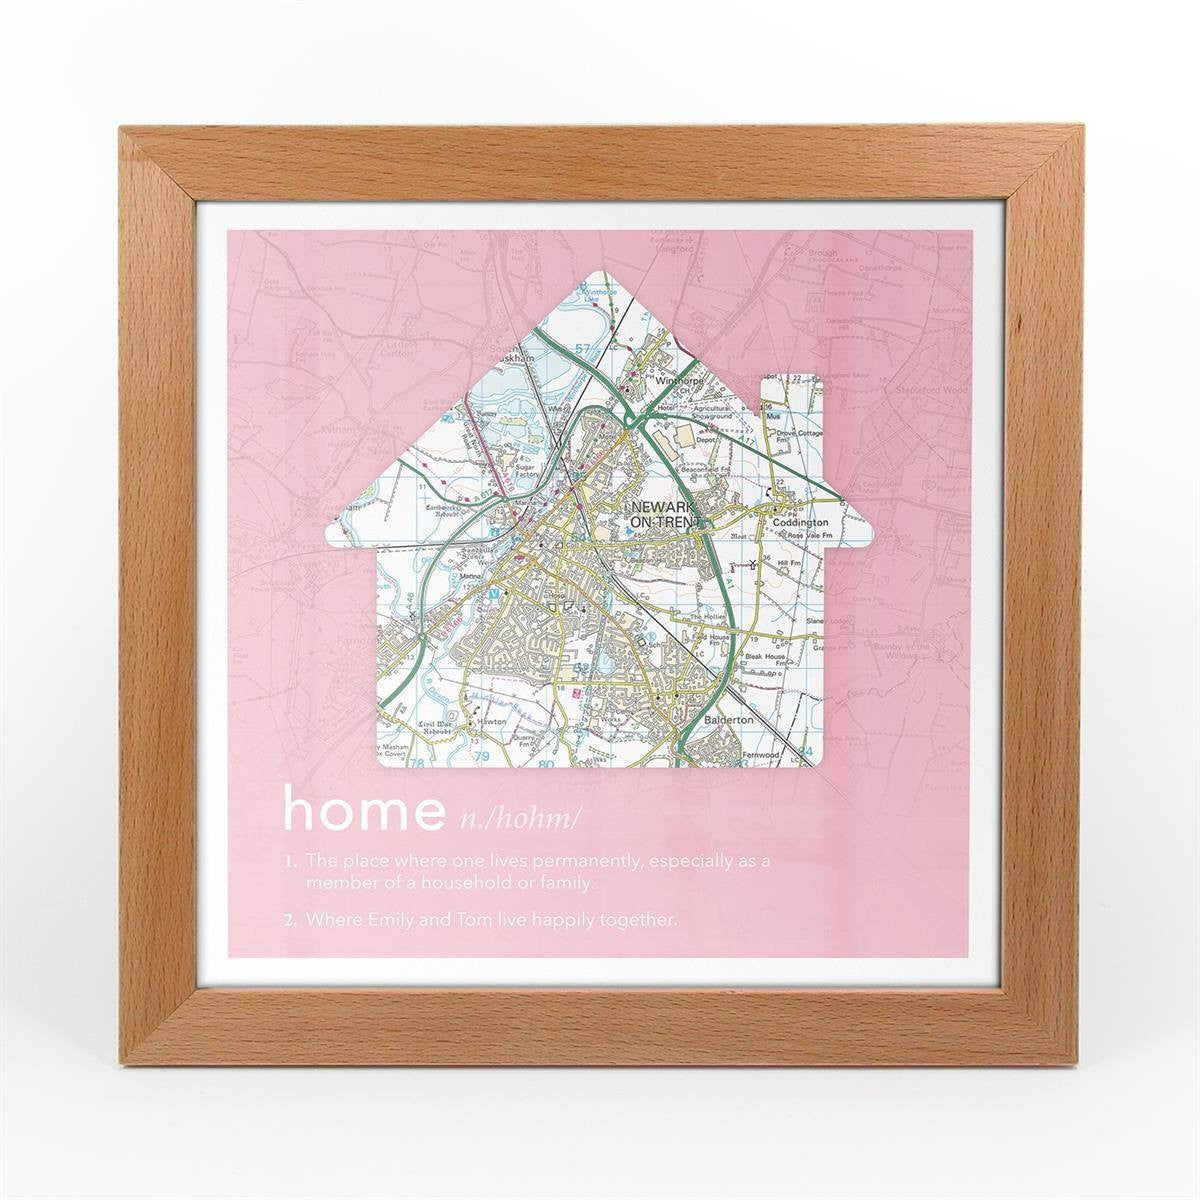 Wall Art - Personalised Framed Dictionary Definition Map - Home